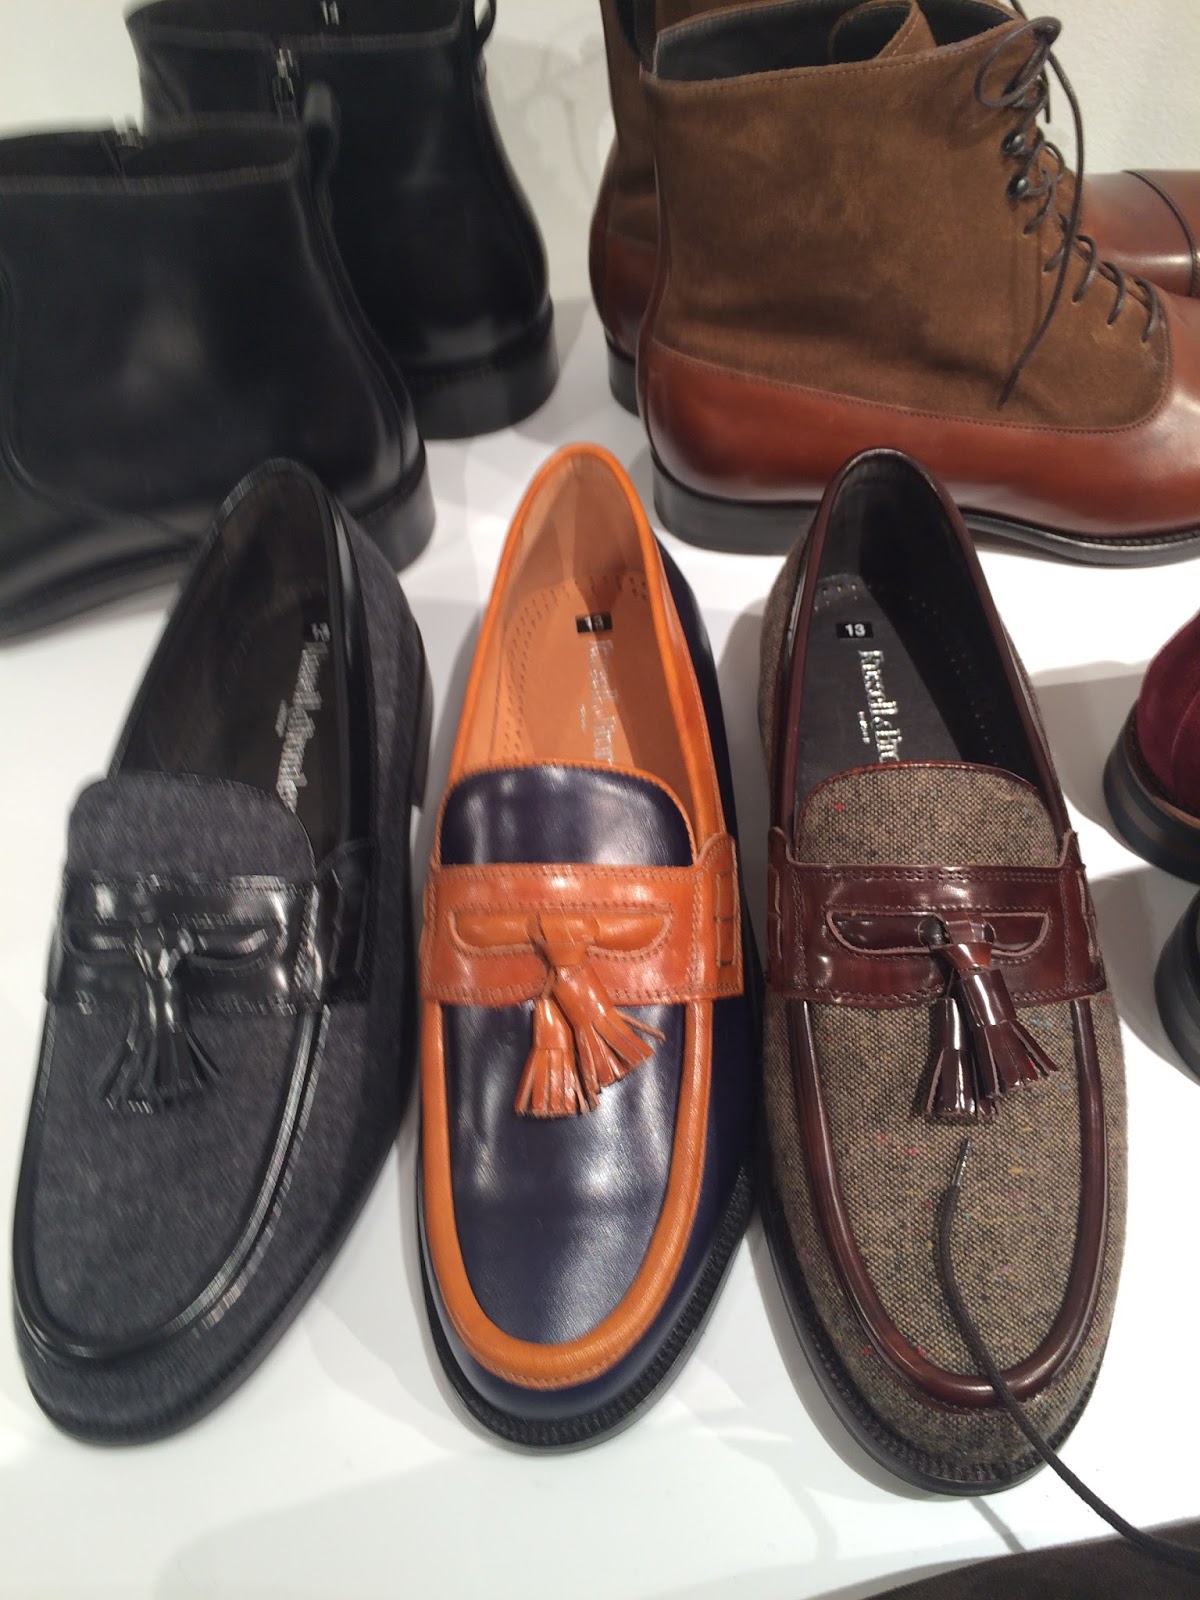 men's styling: Russell & Bromley AW15 mens collection